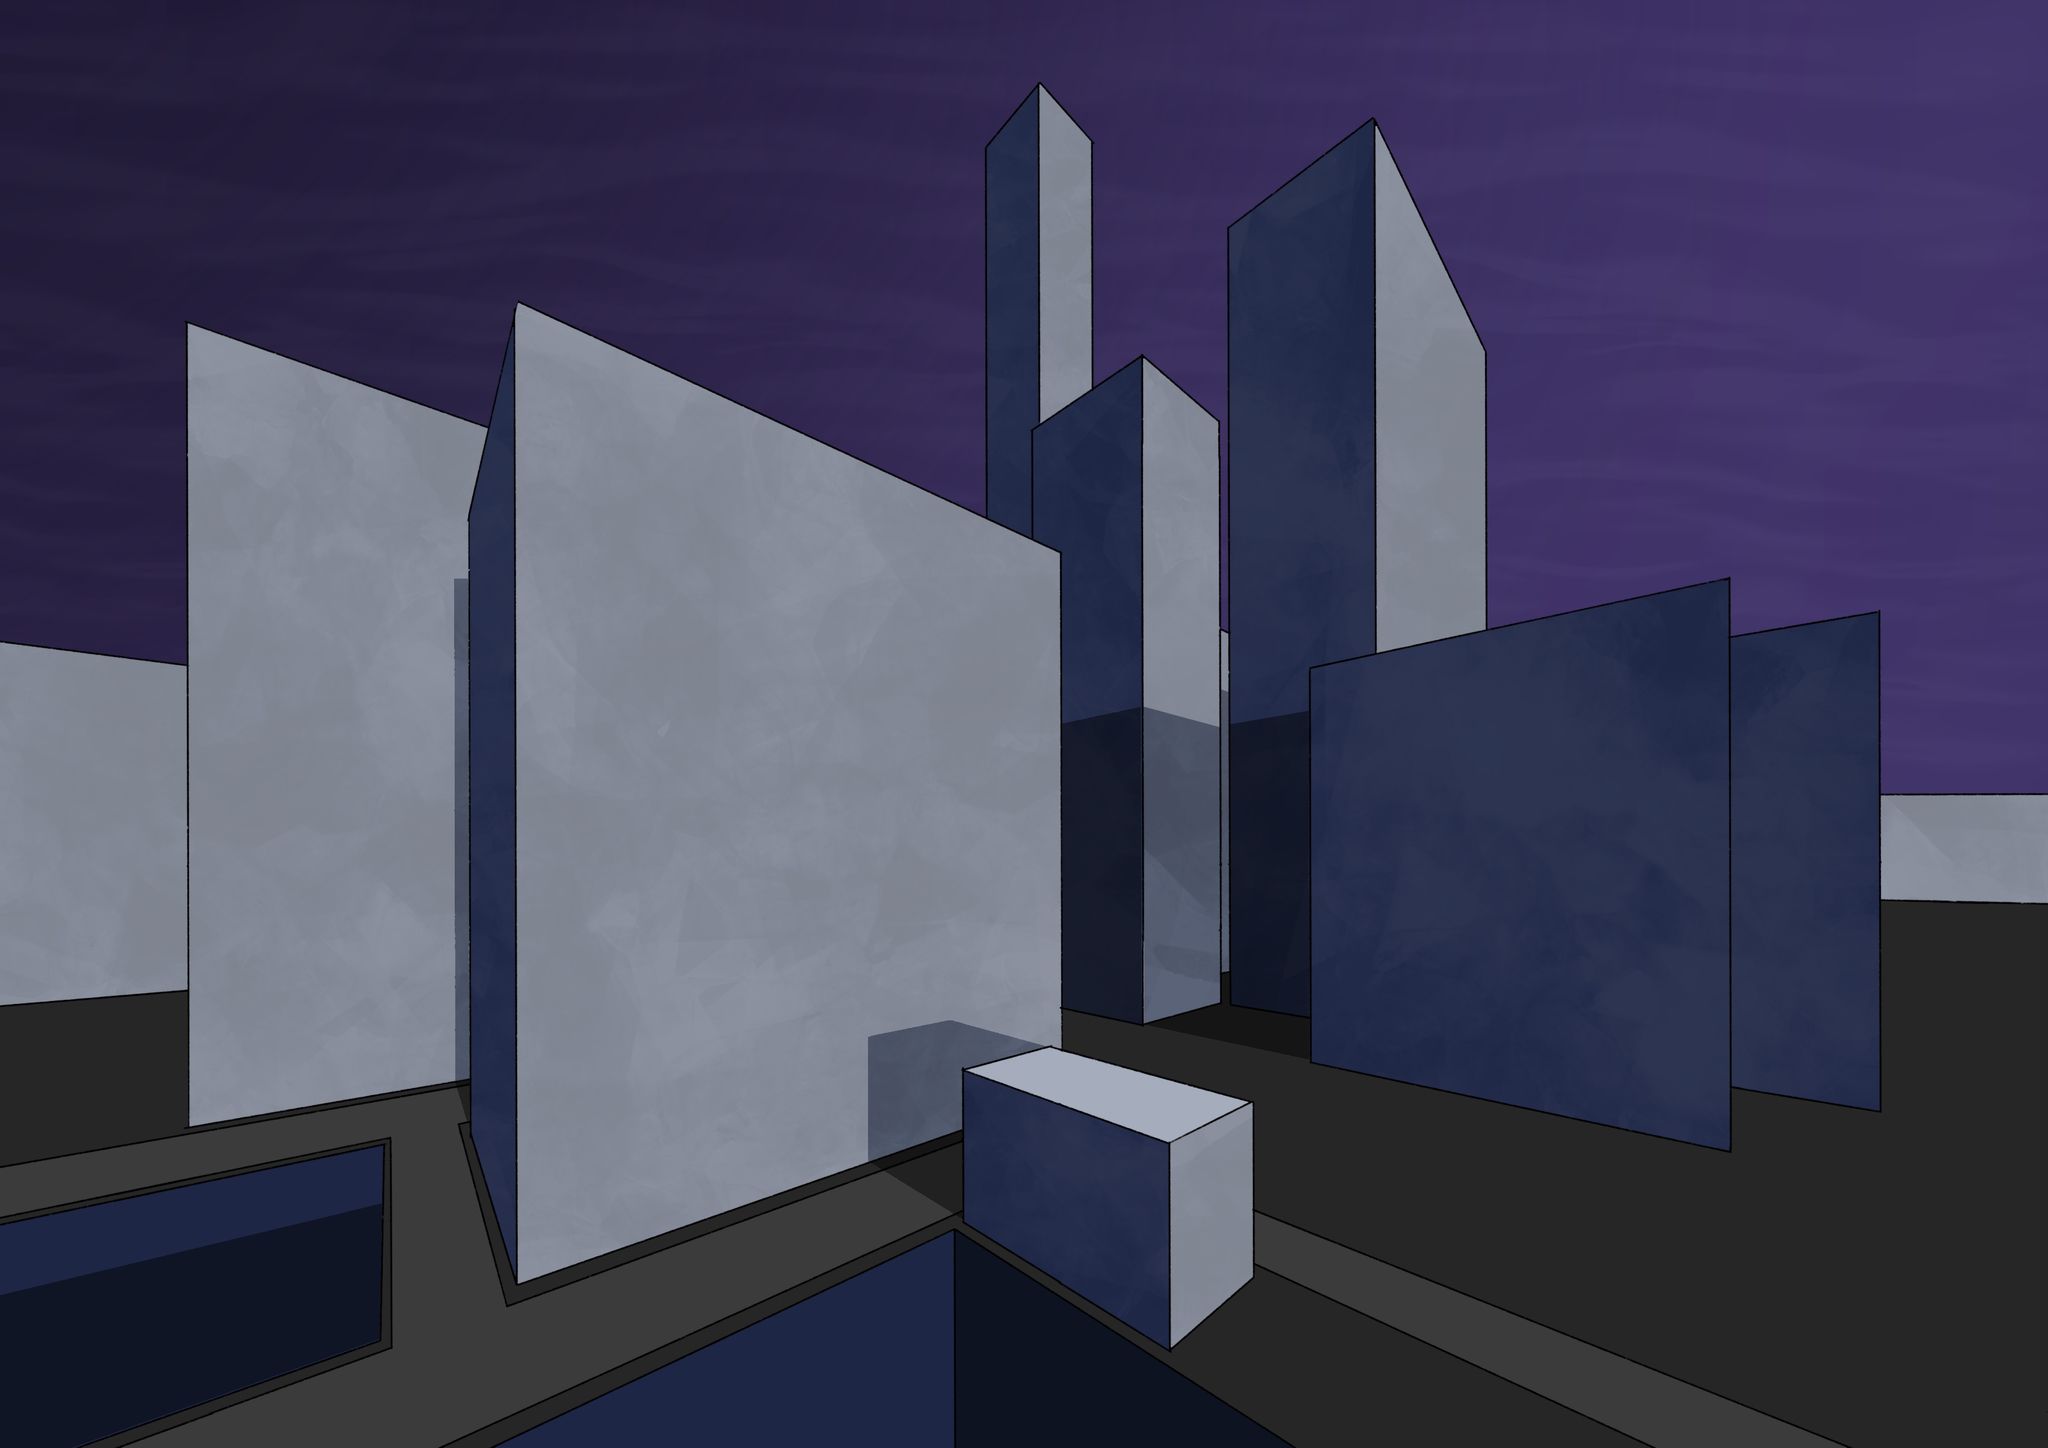 A very clean geometric painting of grey and blue city buildings. The sky is purple and the light is coming from the very right, the buildings casting shadows to the left.